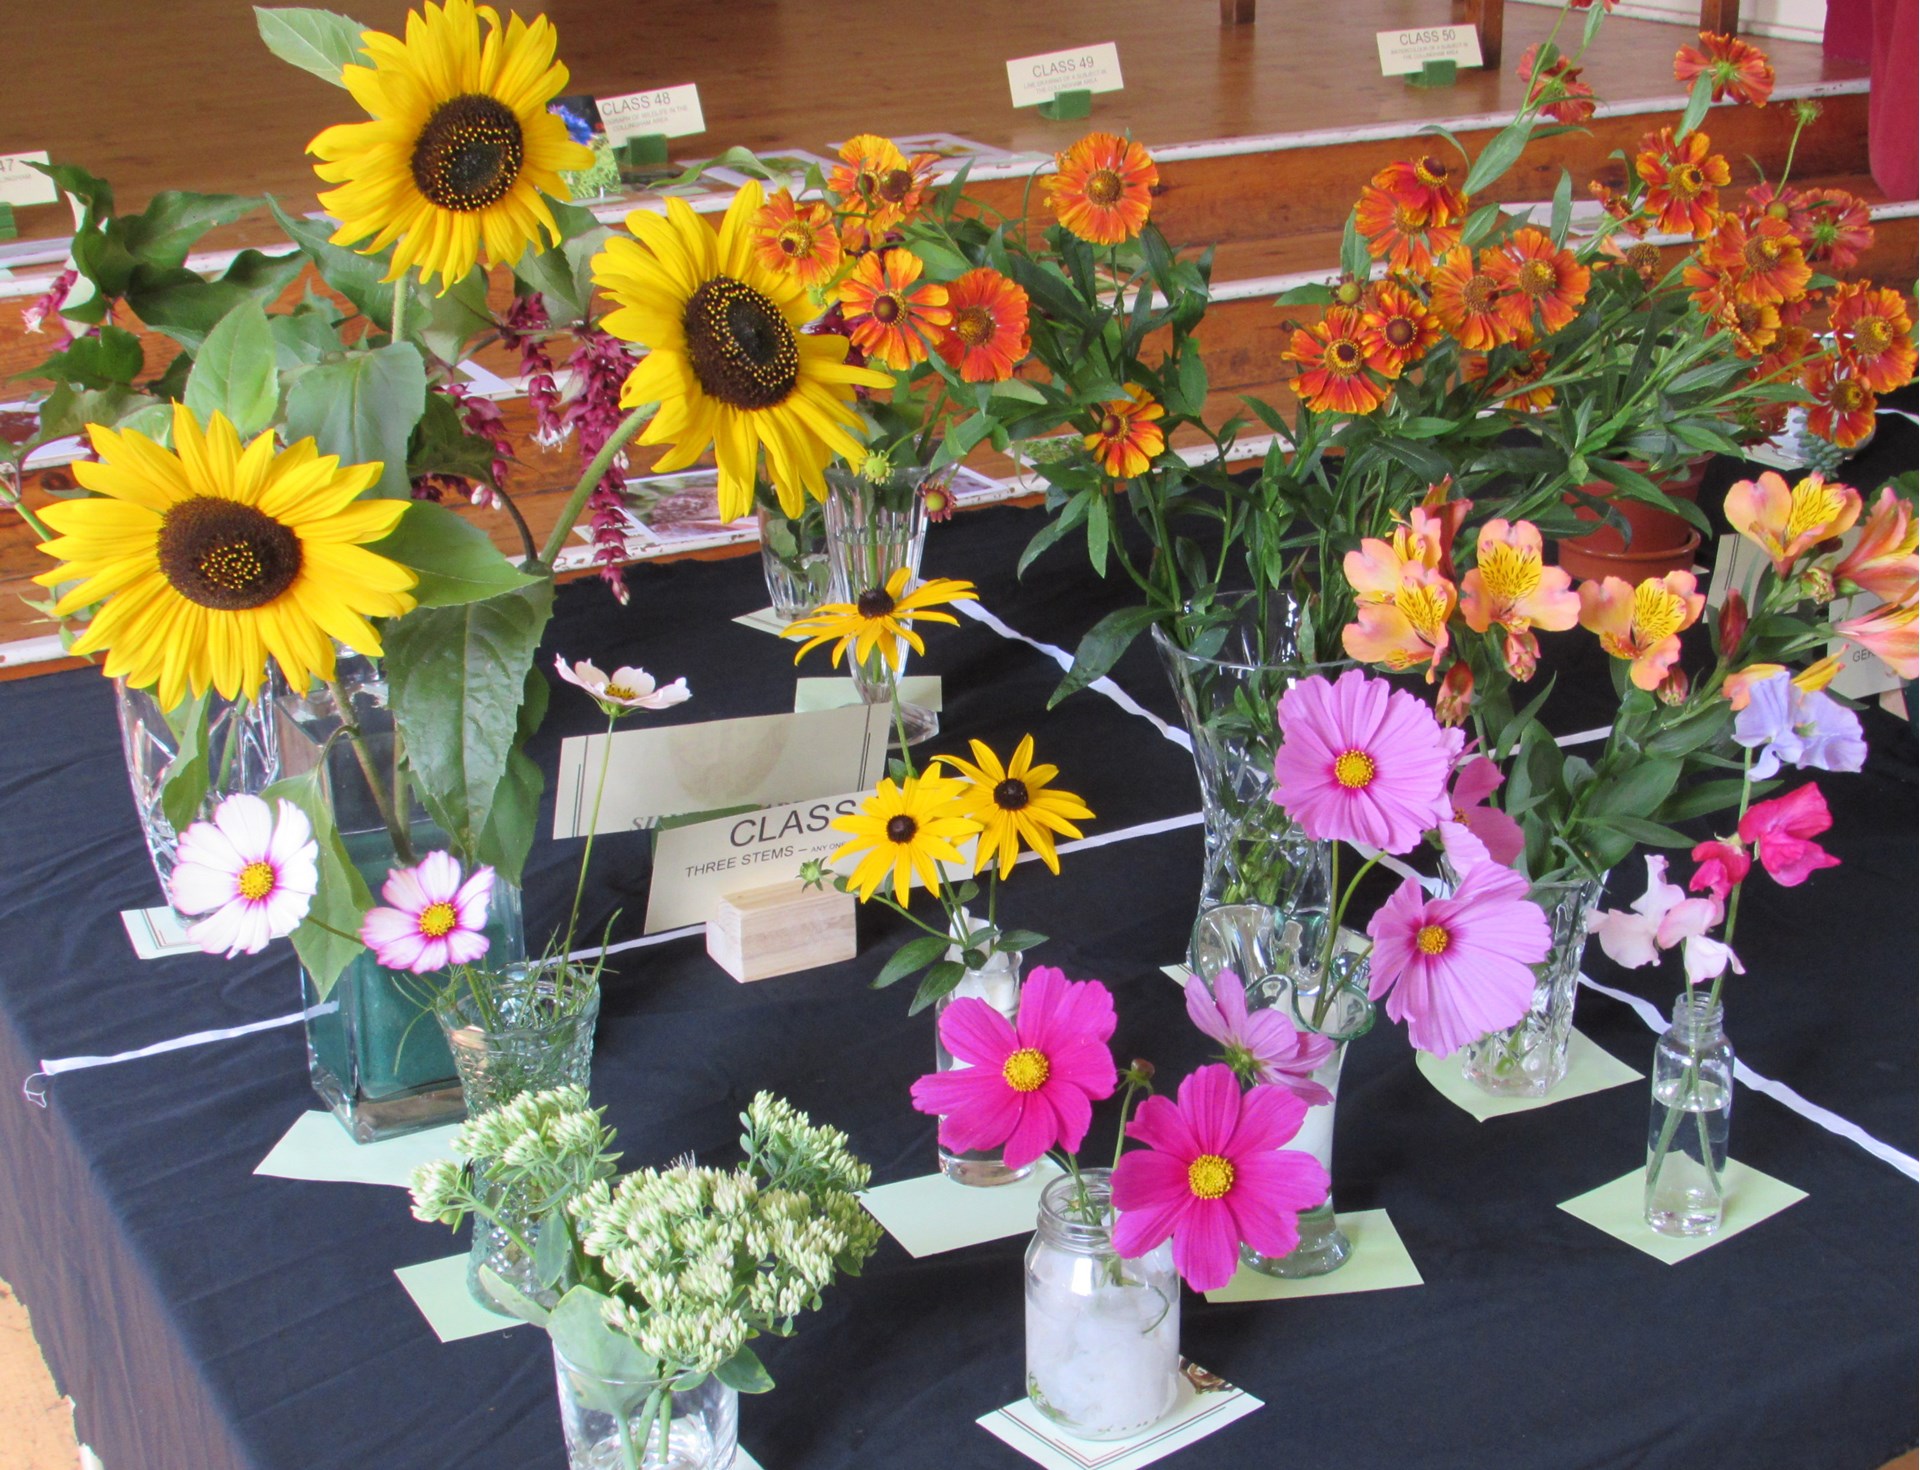 A colourful display at the 2019 Horticultural Show